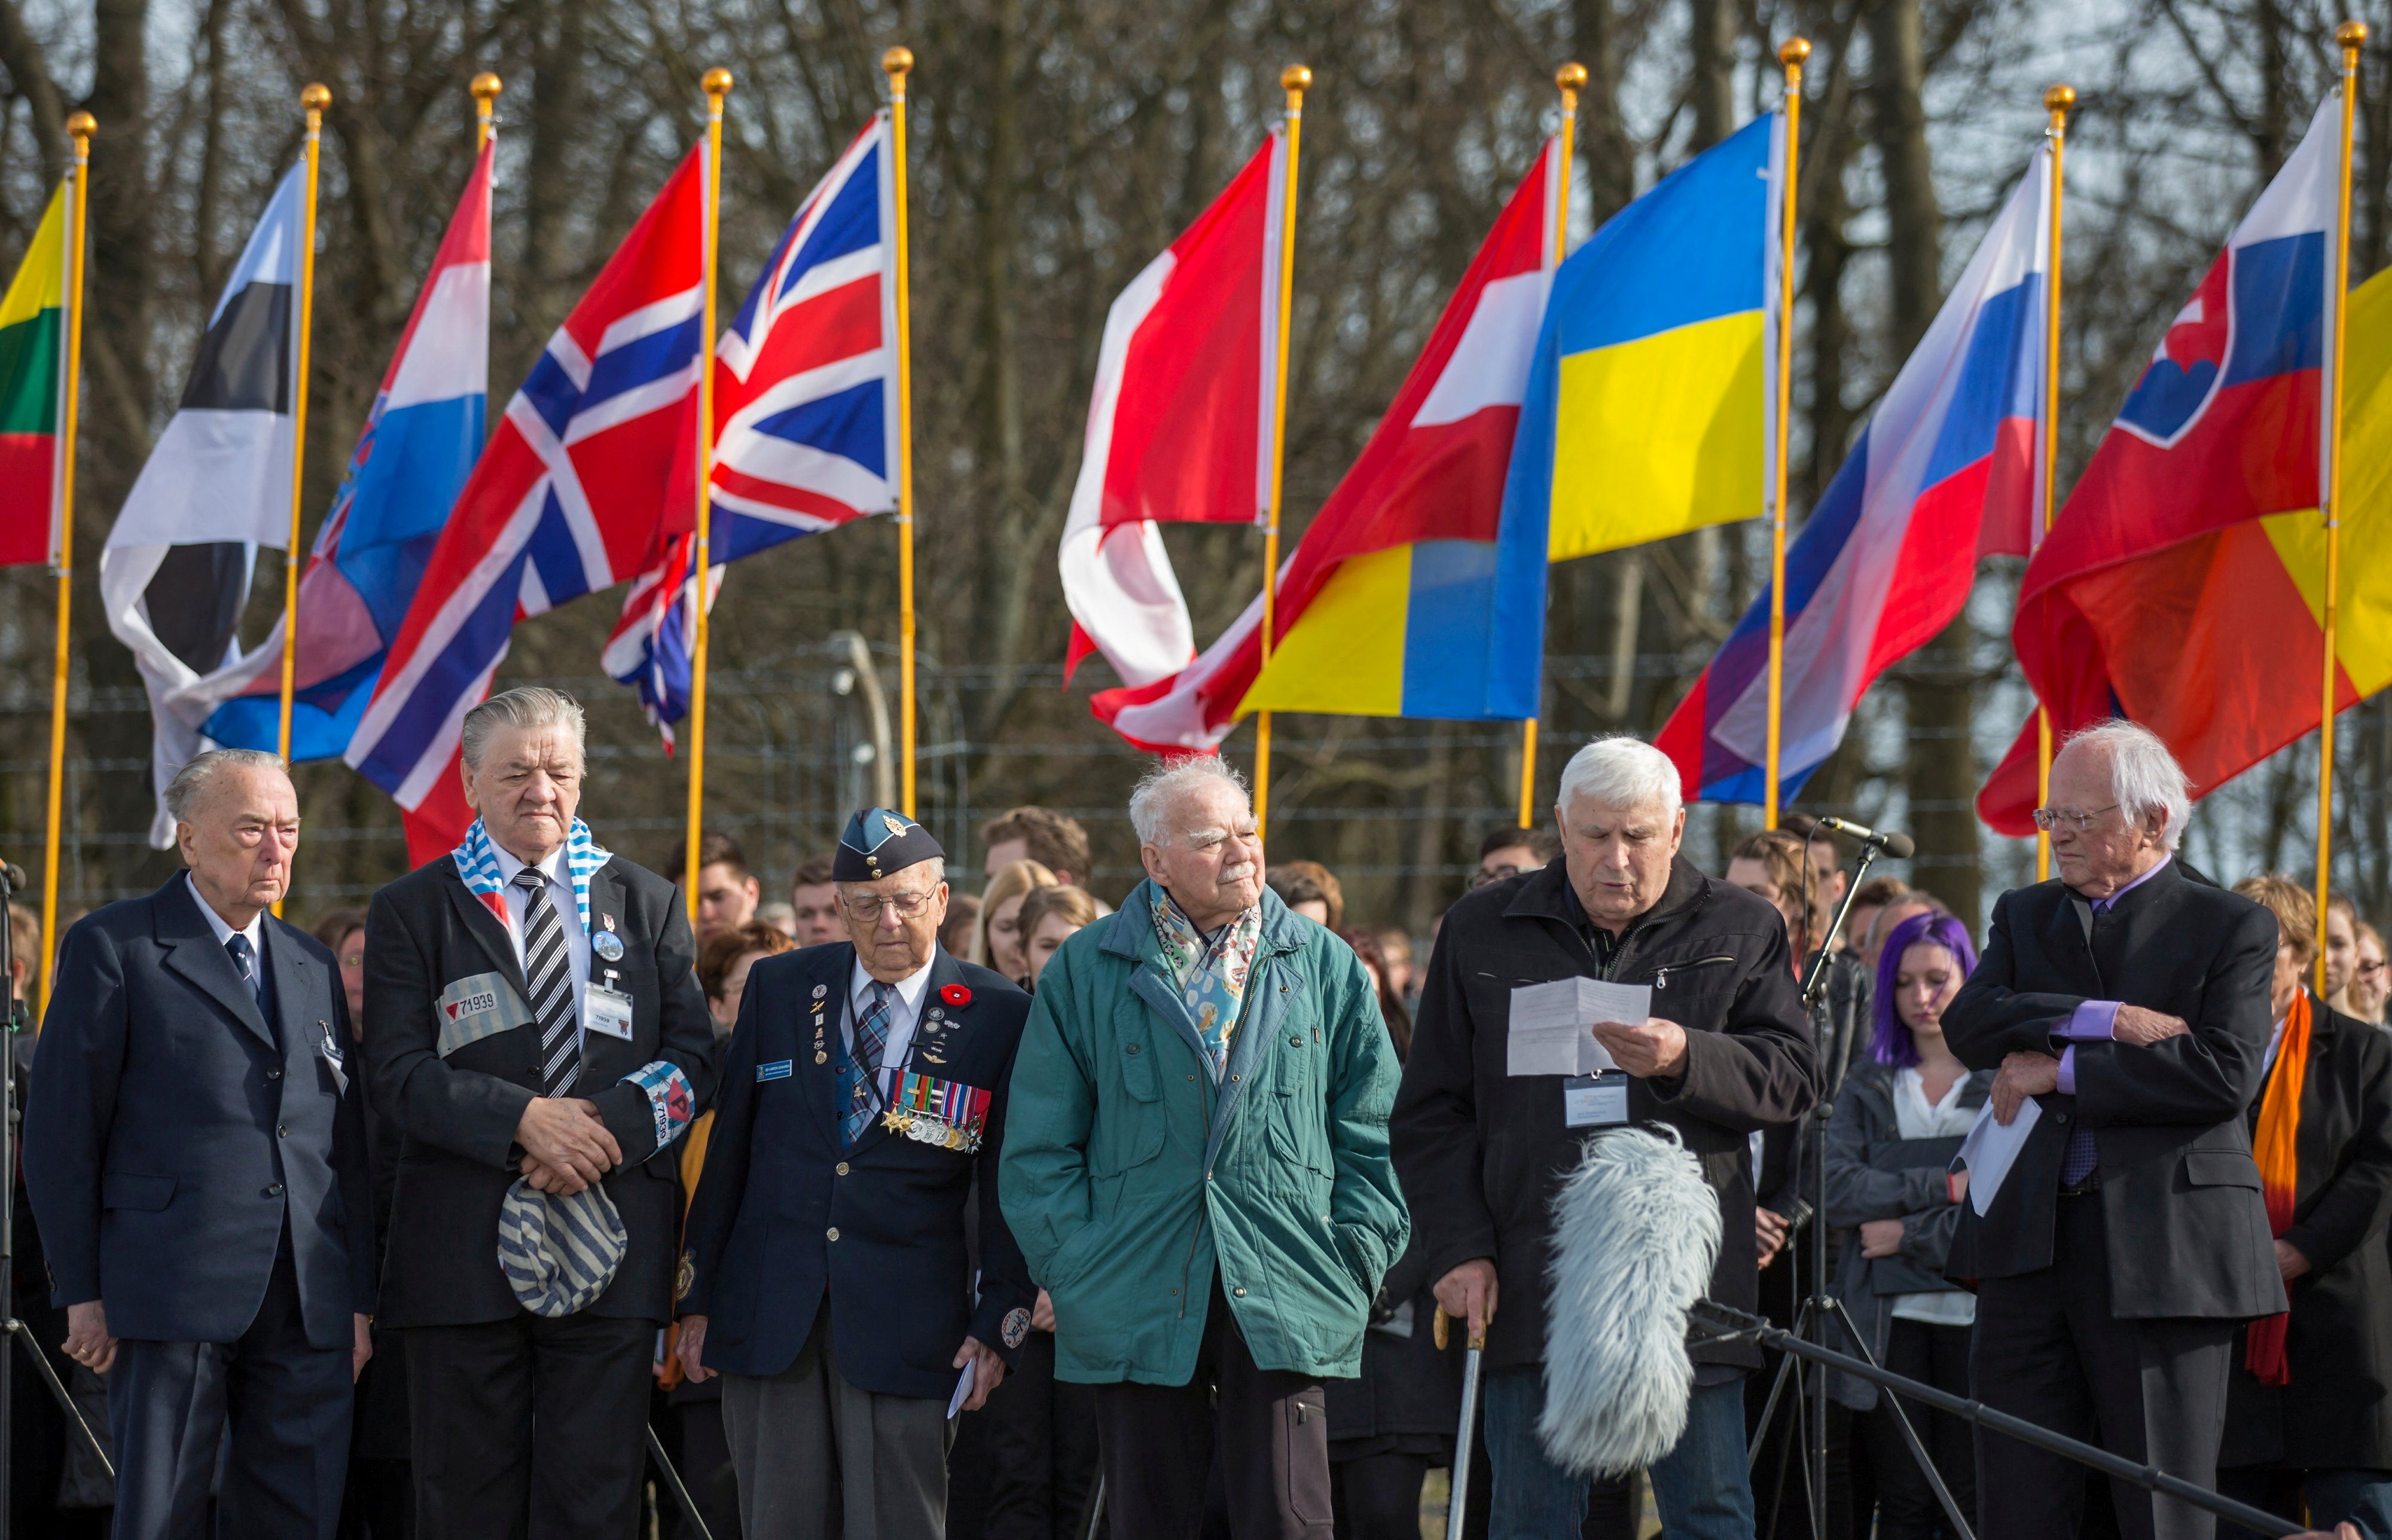 European commemoration of the 70th anniversary of the liberation of the Buchenwald concentration camp, in Weimar